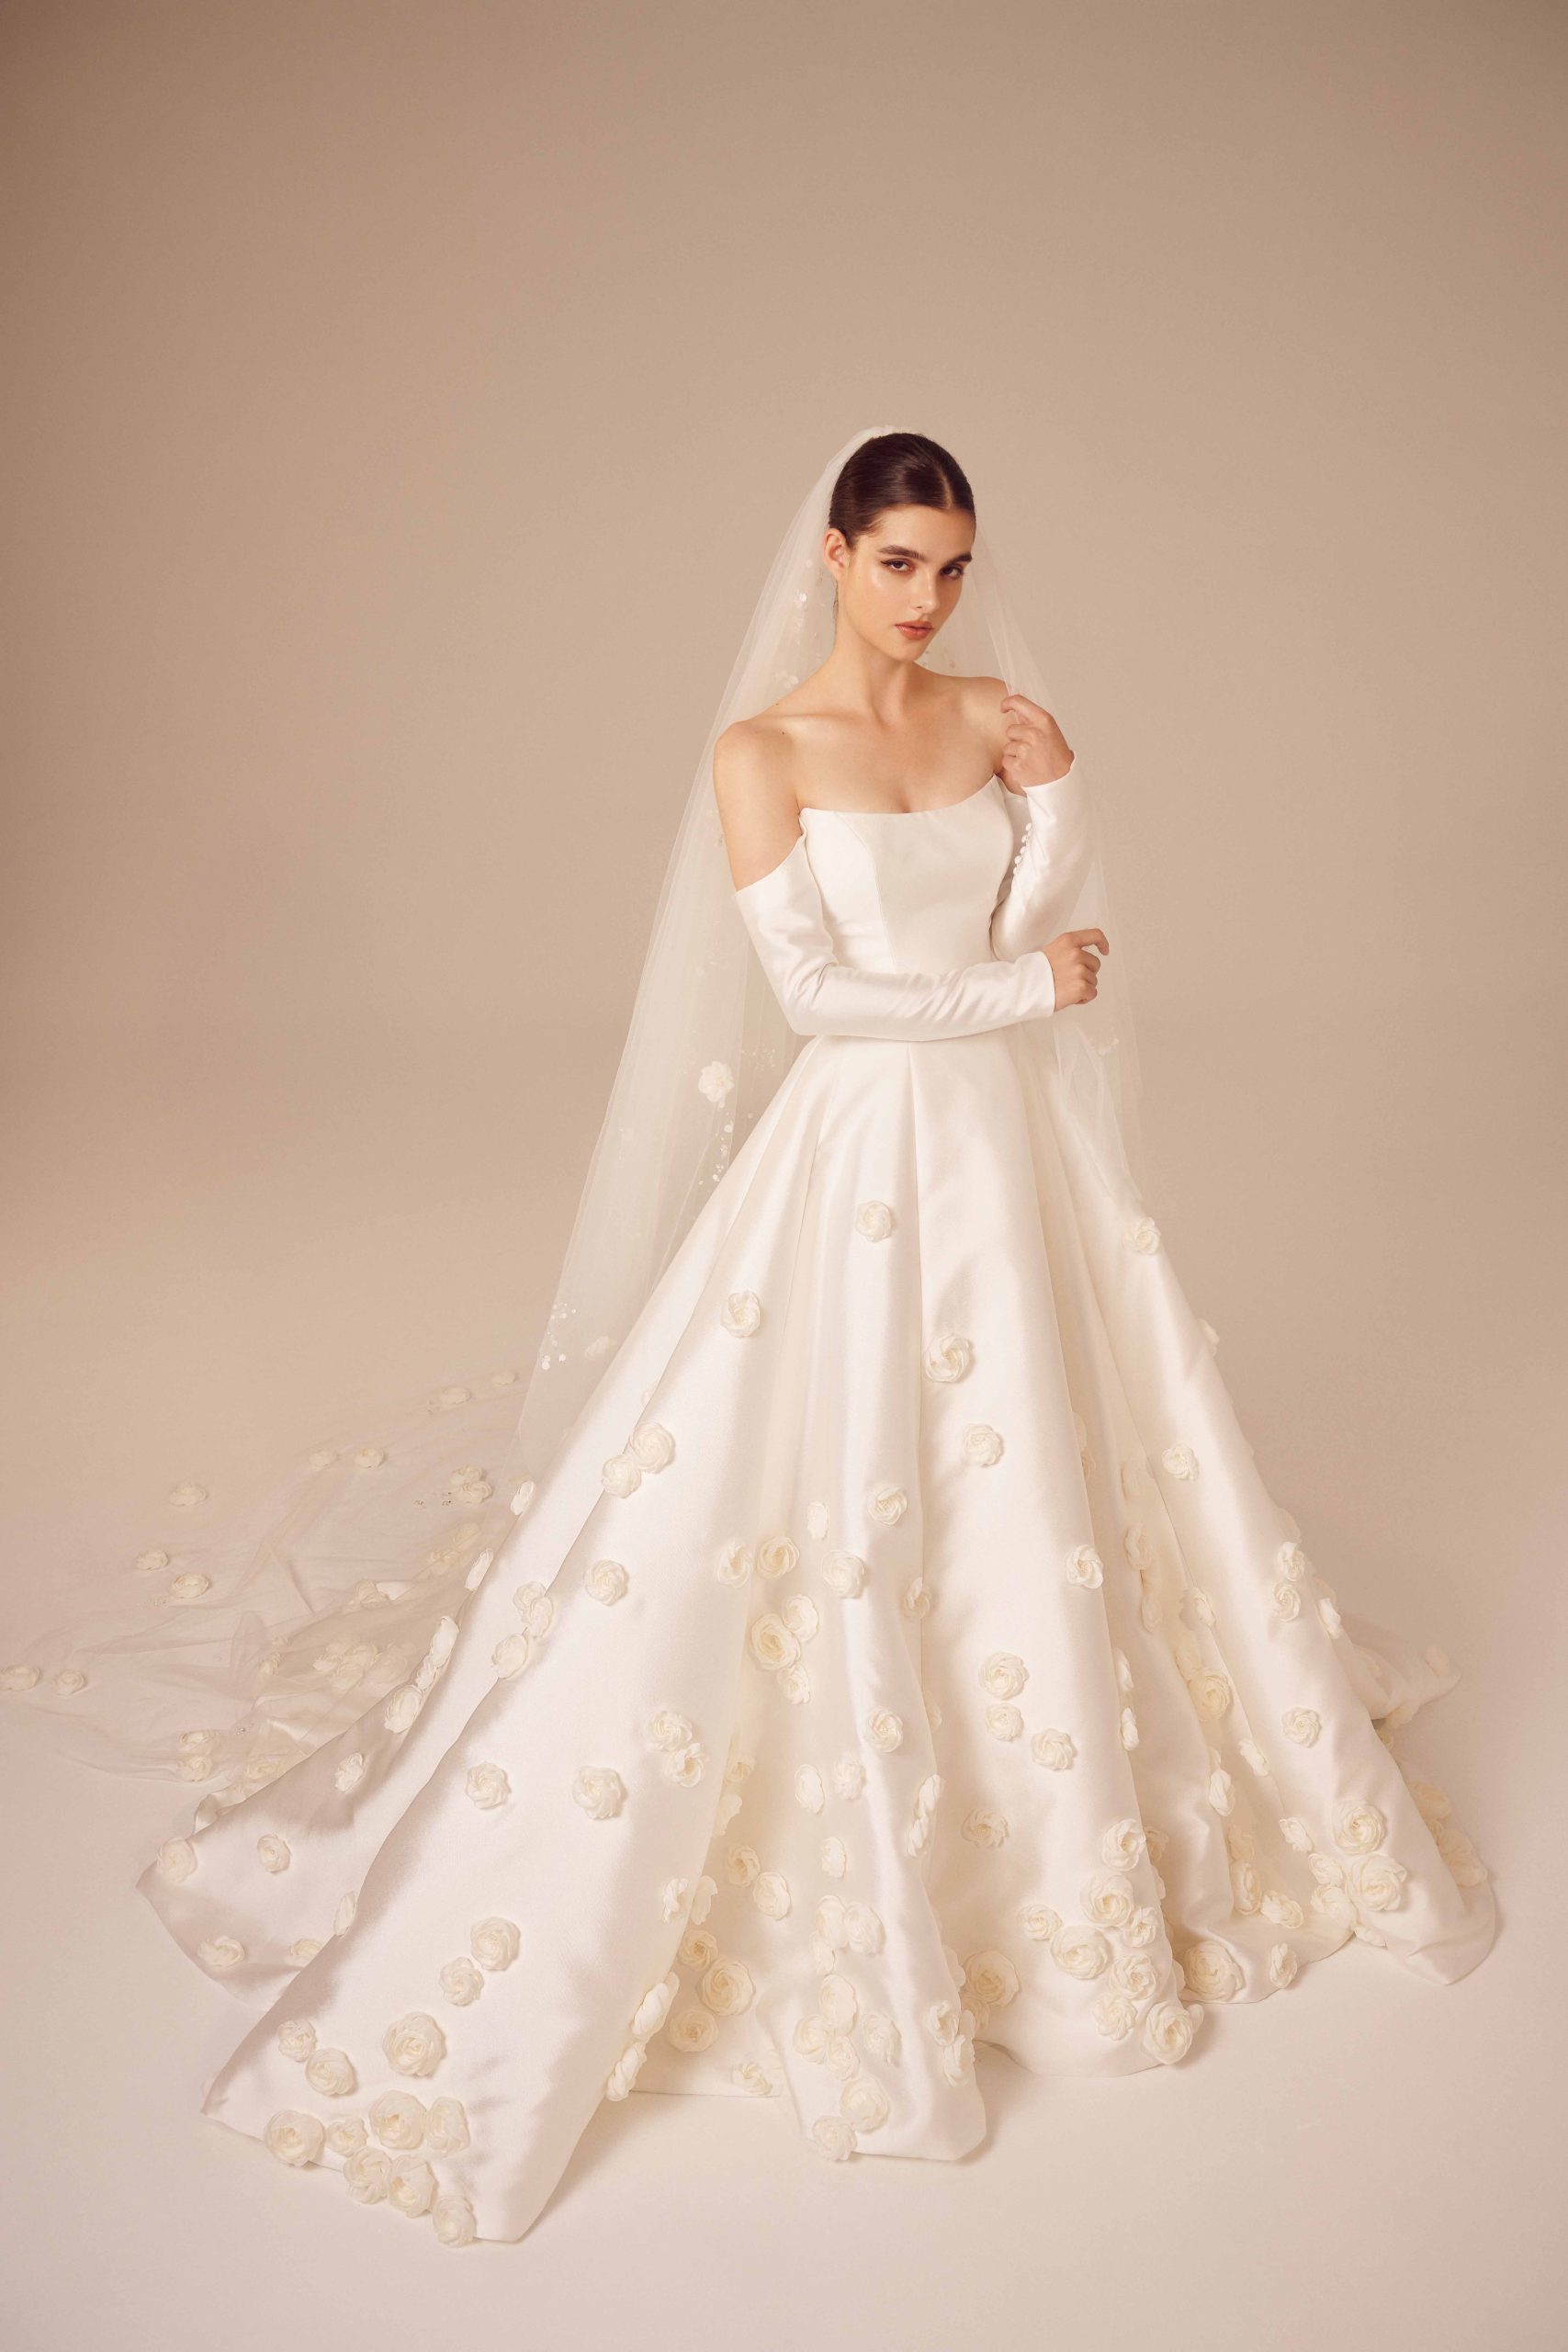 Off-the-Shoulder Mikado Ball Gown With Floral Appliqué by Nicole + Felicia - Image 1